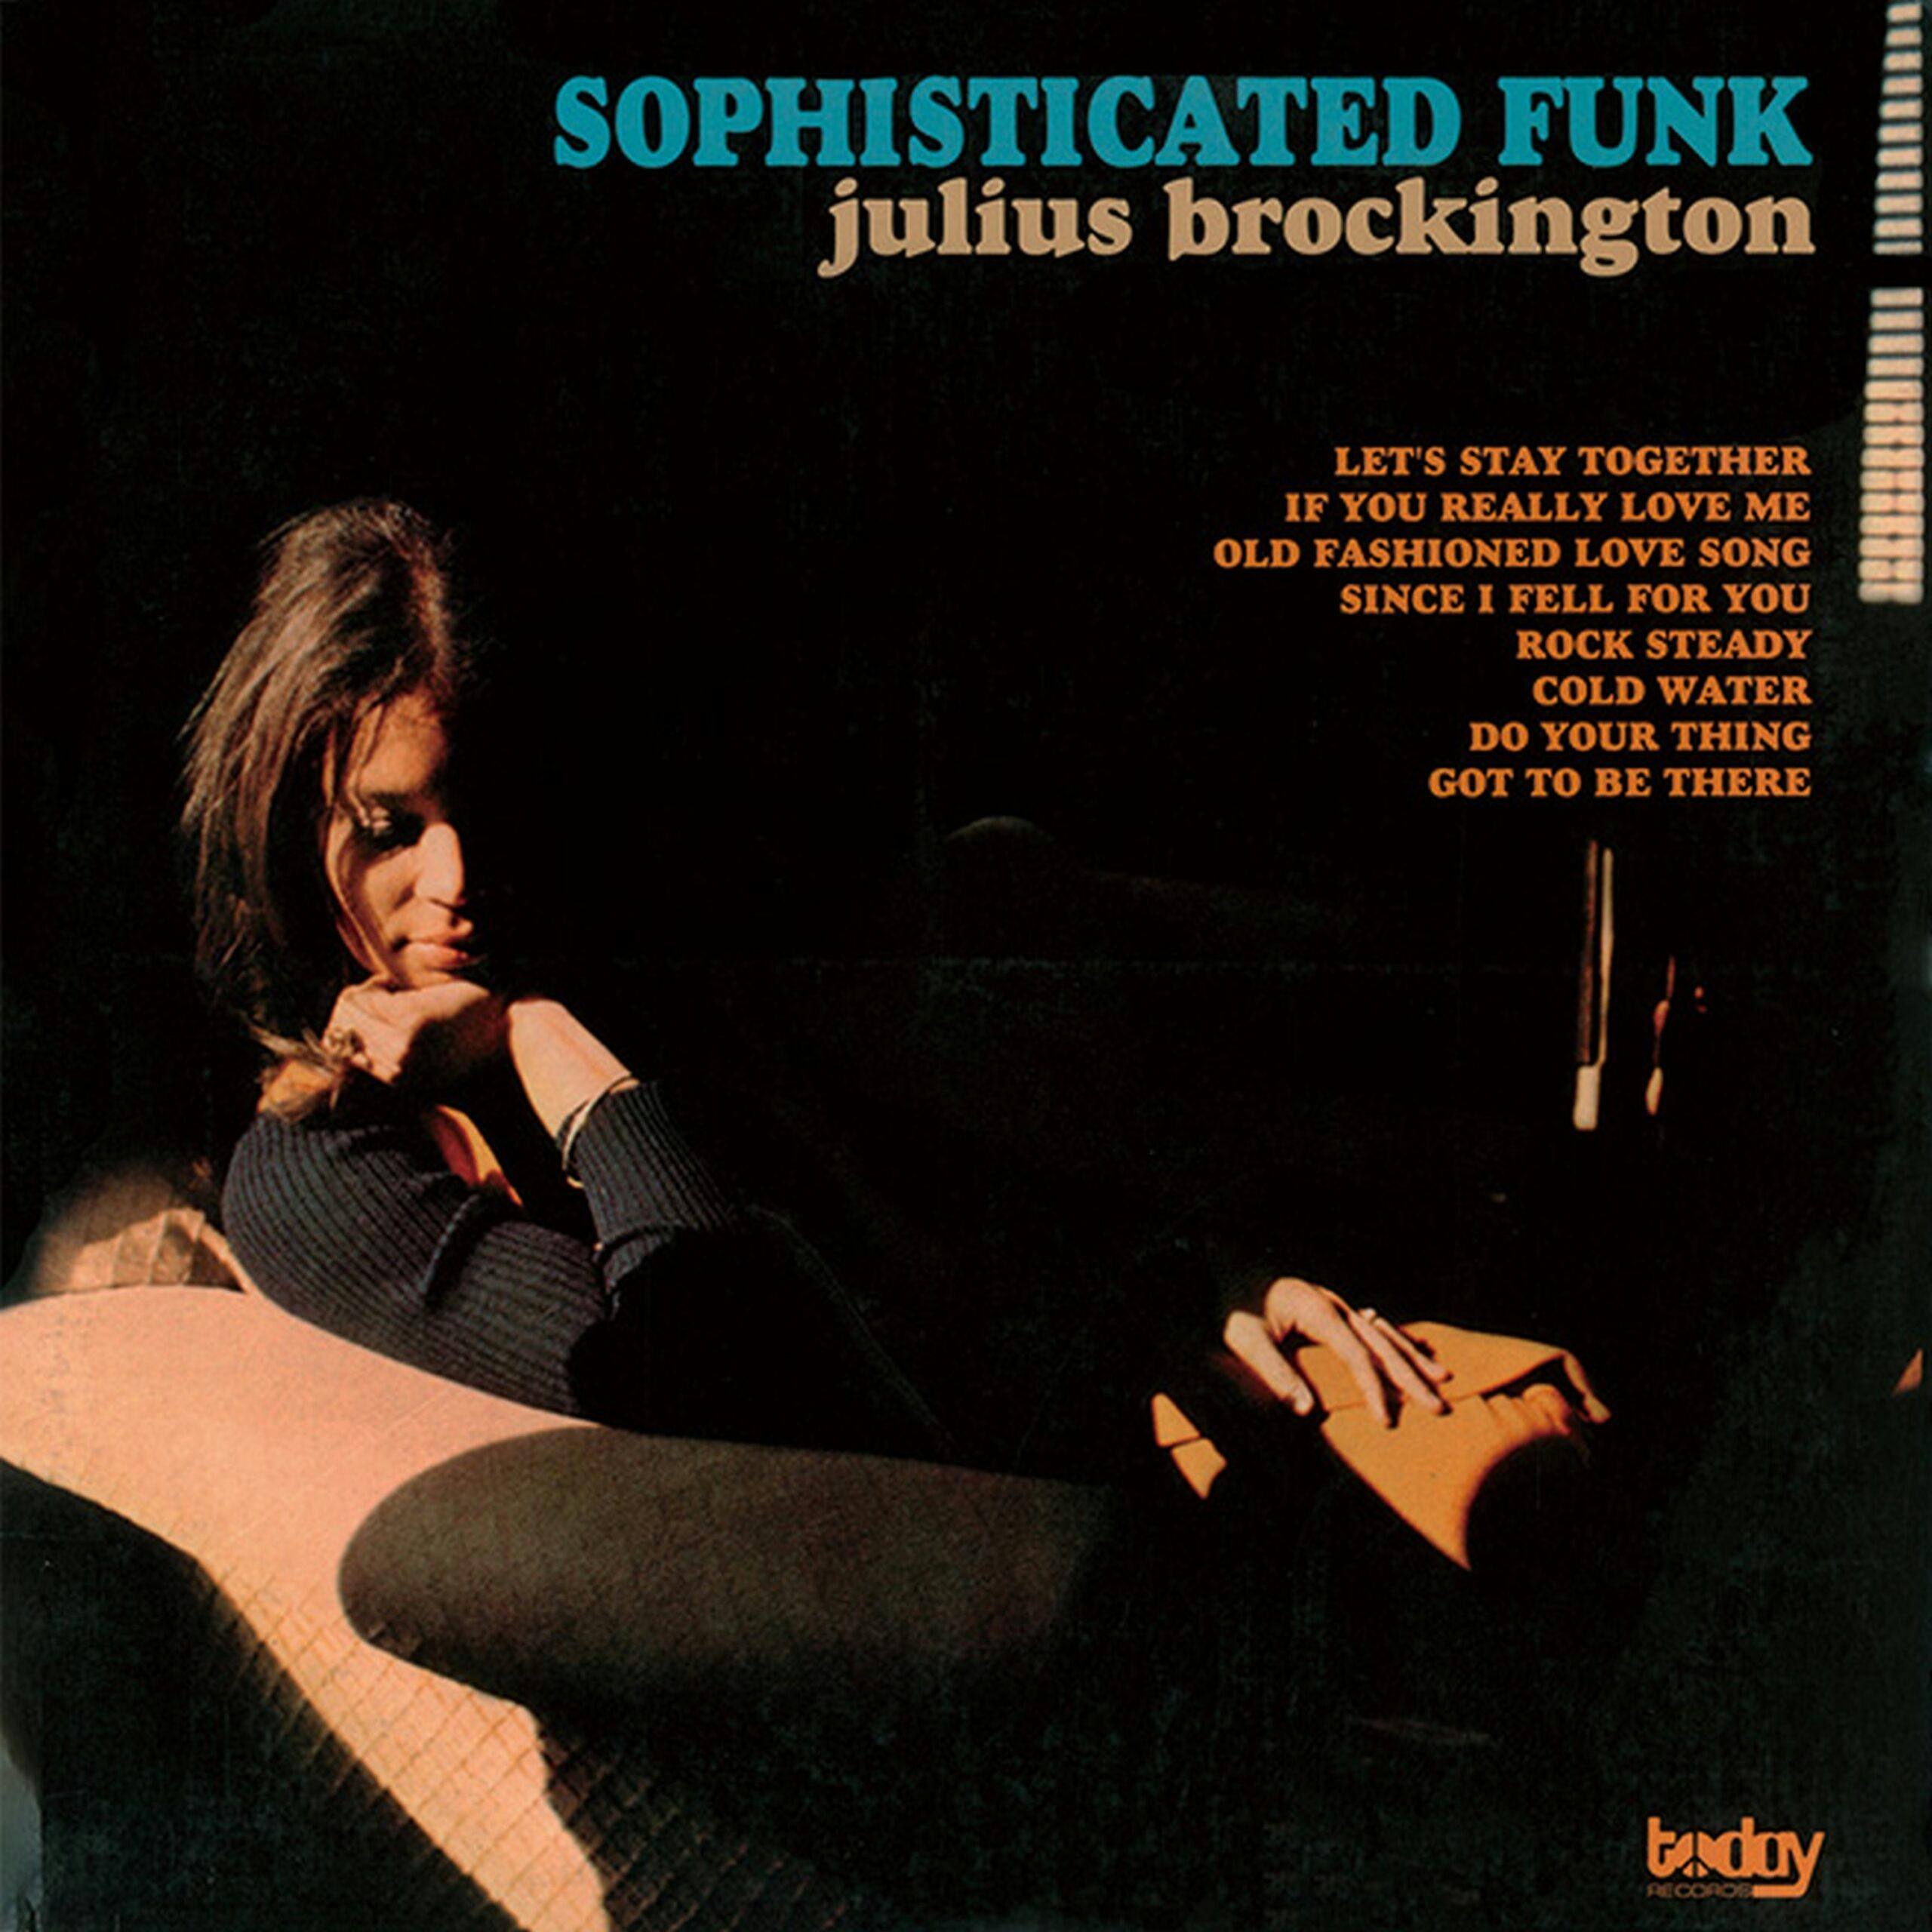 Next up in the Perception/Today records series of BBE Music re-issues is the keyboardist, producer and arranger's 1972 album Sophisticated Funk. Released initially on the Today Records imprint headed by future 'Godfather of Disco' and Universal Robot Band member, Patrick Adams.